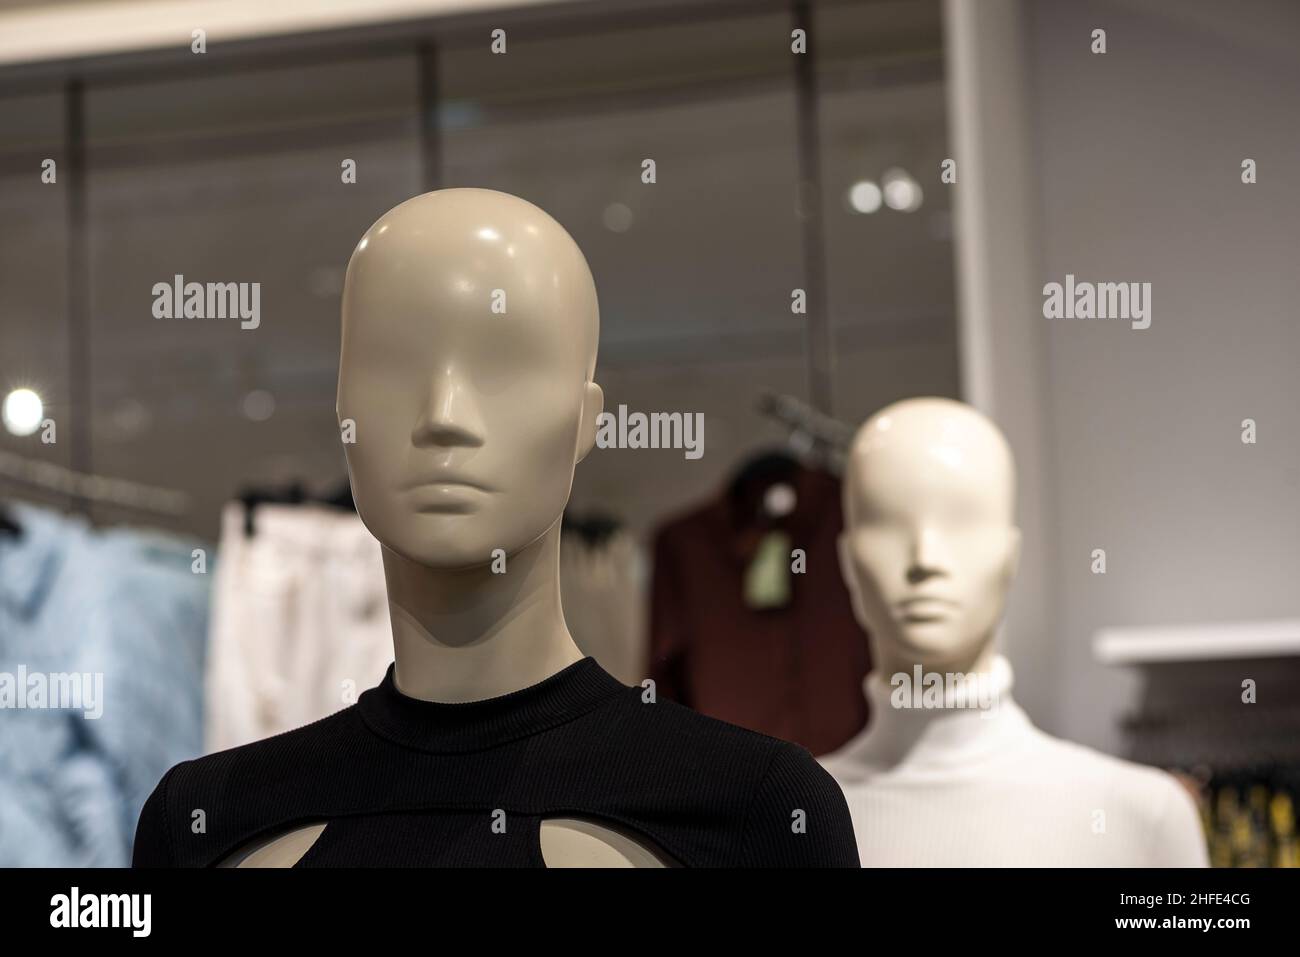 Glossy White Men's Store Manikin for Sale - China Male Mannequin